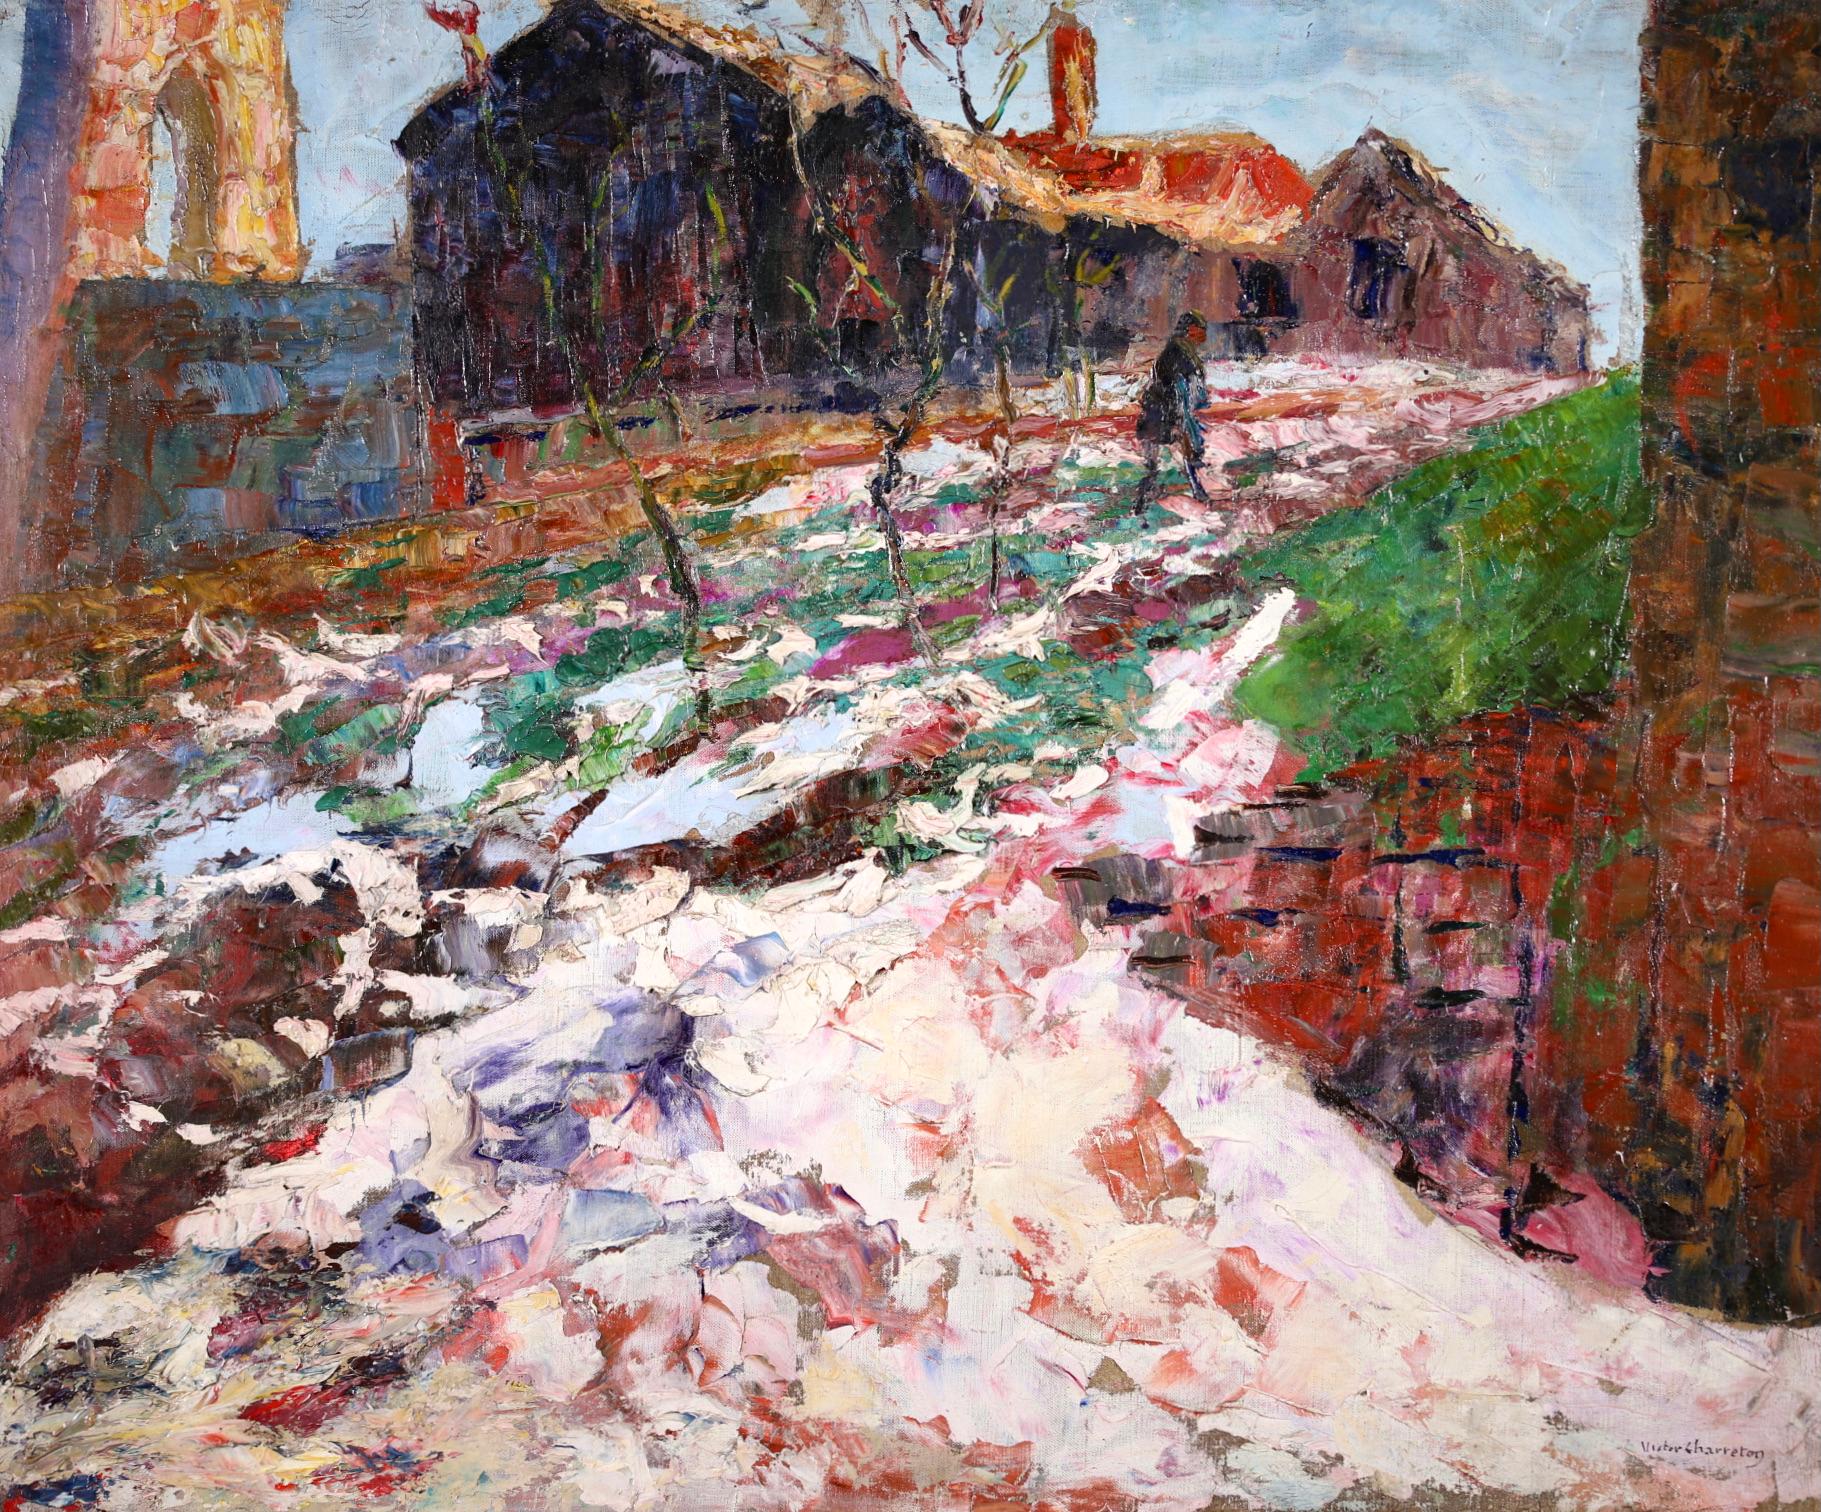 Victor Charreton - Woman in Snow - Post Impressionist Oil, Figure in  Landscape by Victor Charreton For Sale at 1stDibs